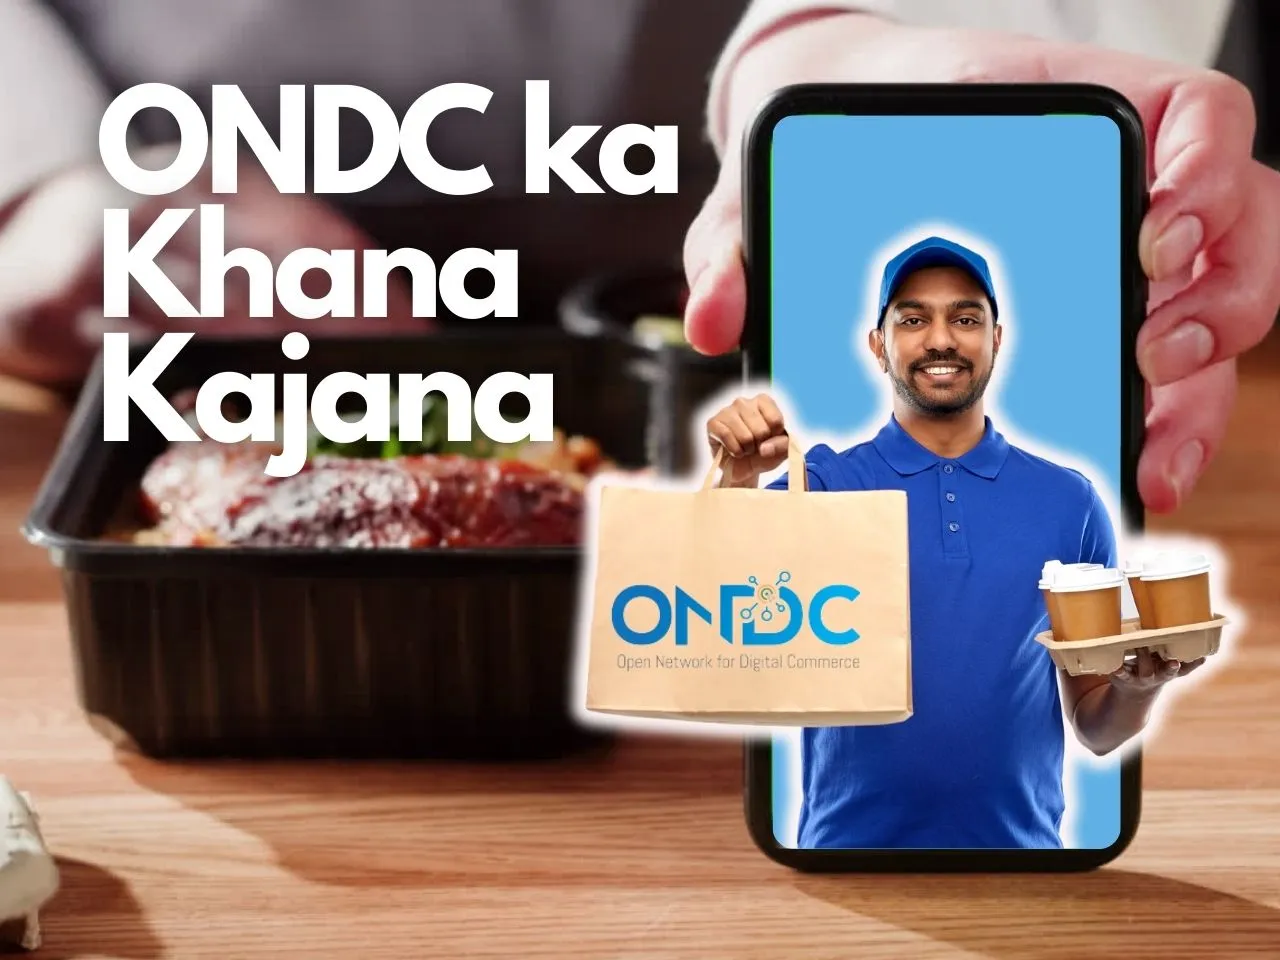 Why ONDC Is Emerging As A Favorite Among Restaurants & Food Startups?